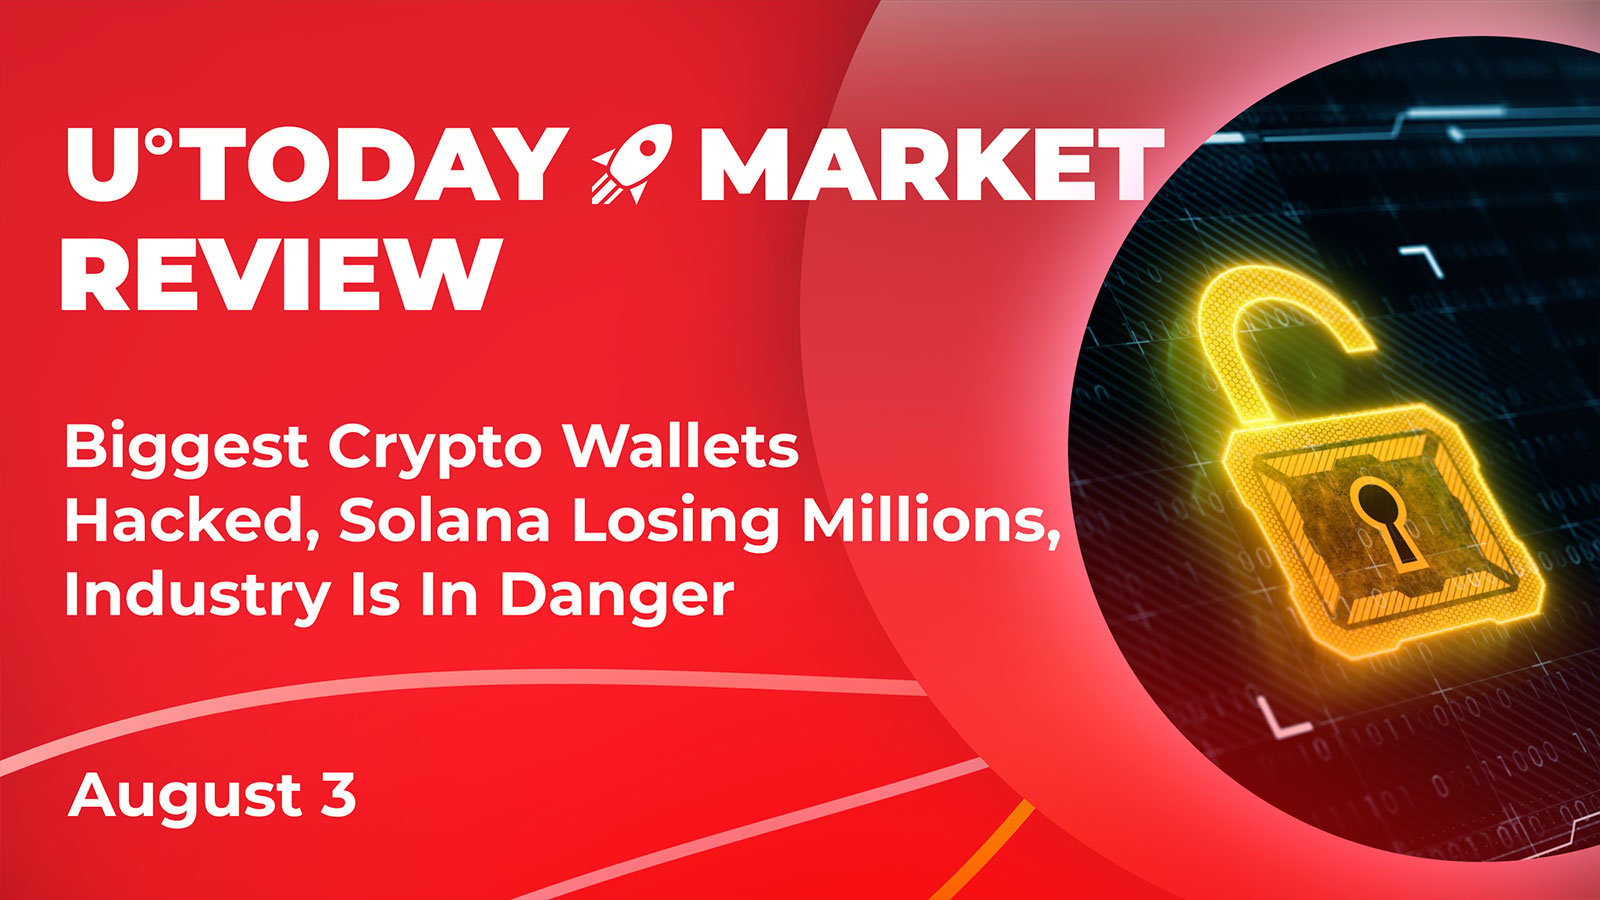 Biggest Crypto Wallets Hacked, Solana Losing Millions, Industry Is In Danger: Crypto Market Review, August 3